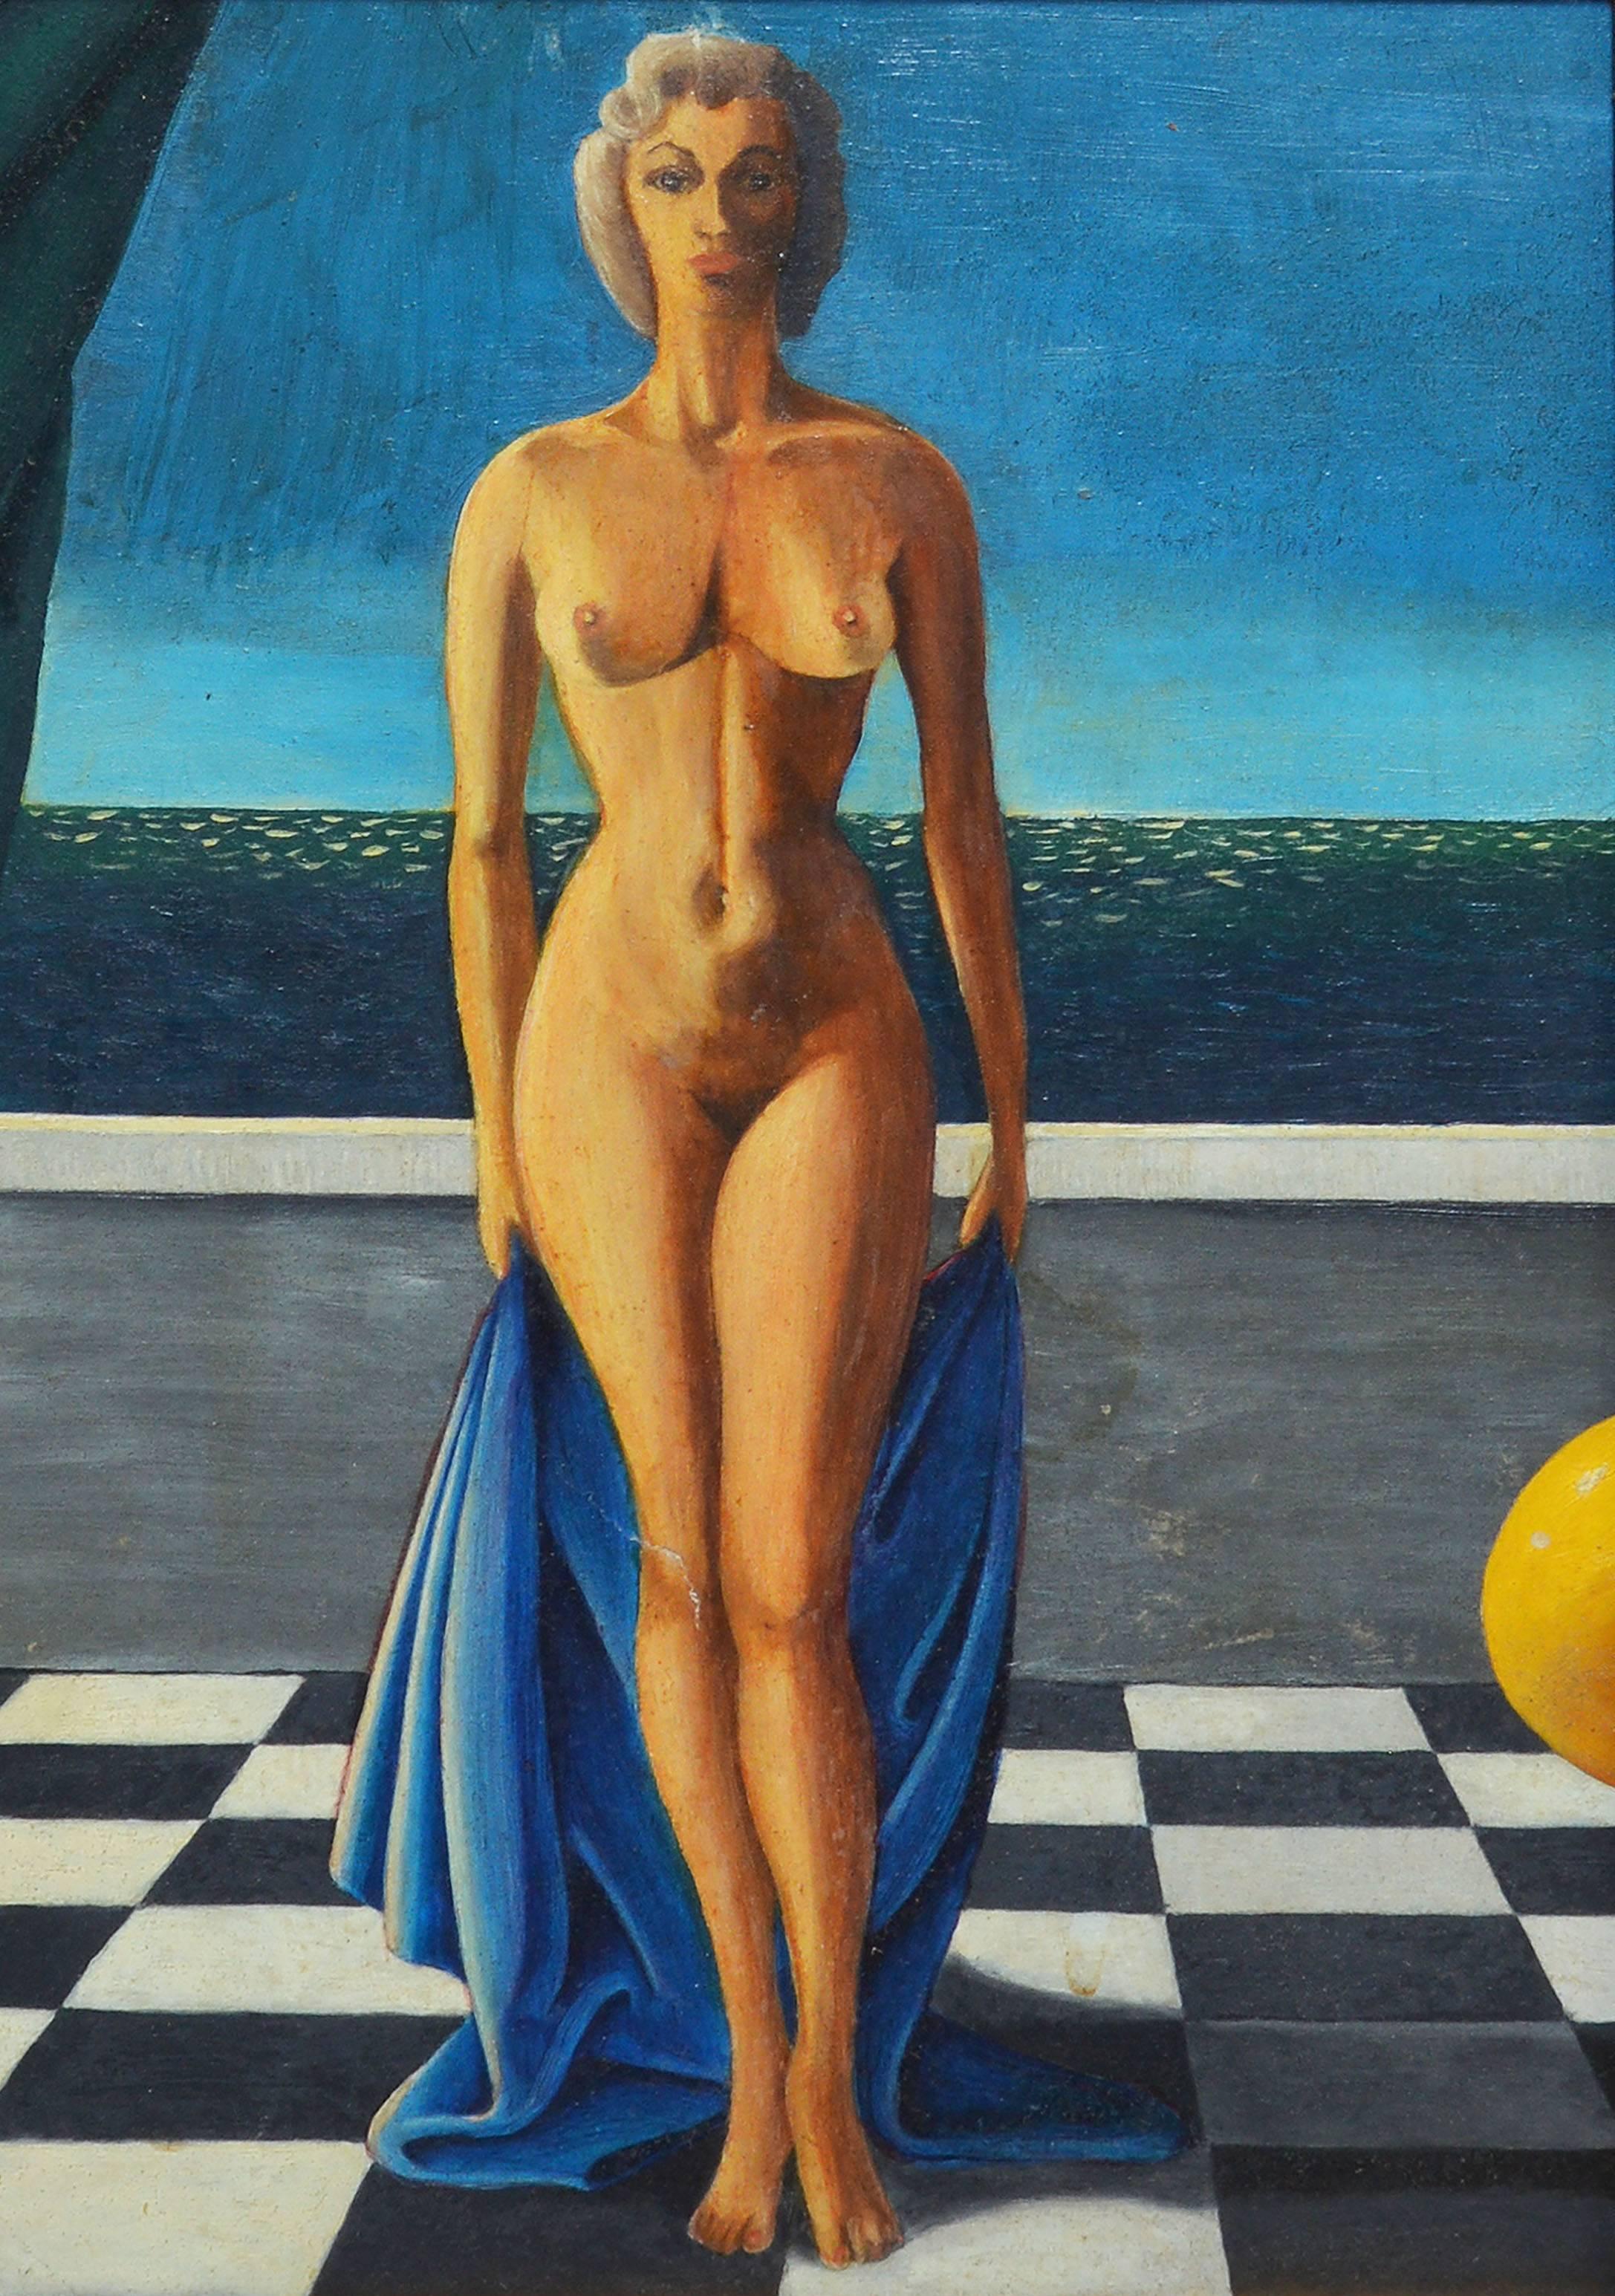 Surreal Nude Portrait by the Sea - Surrealist Painting by Unknown